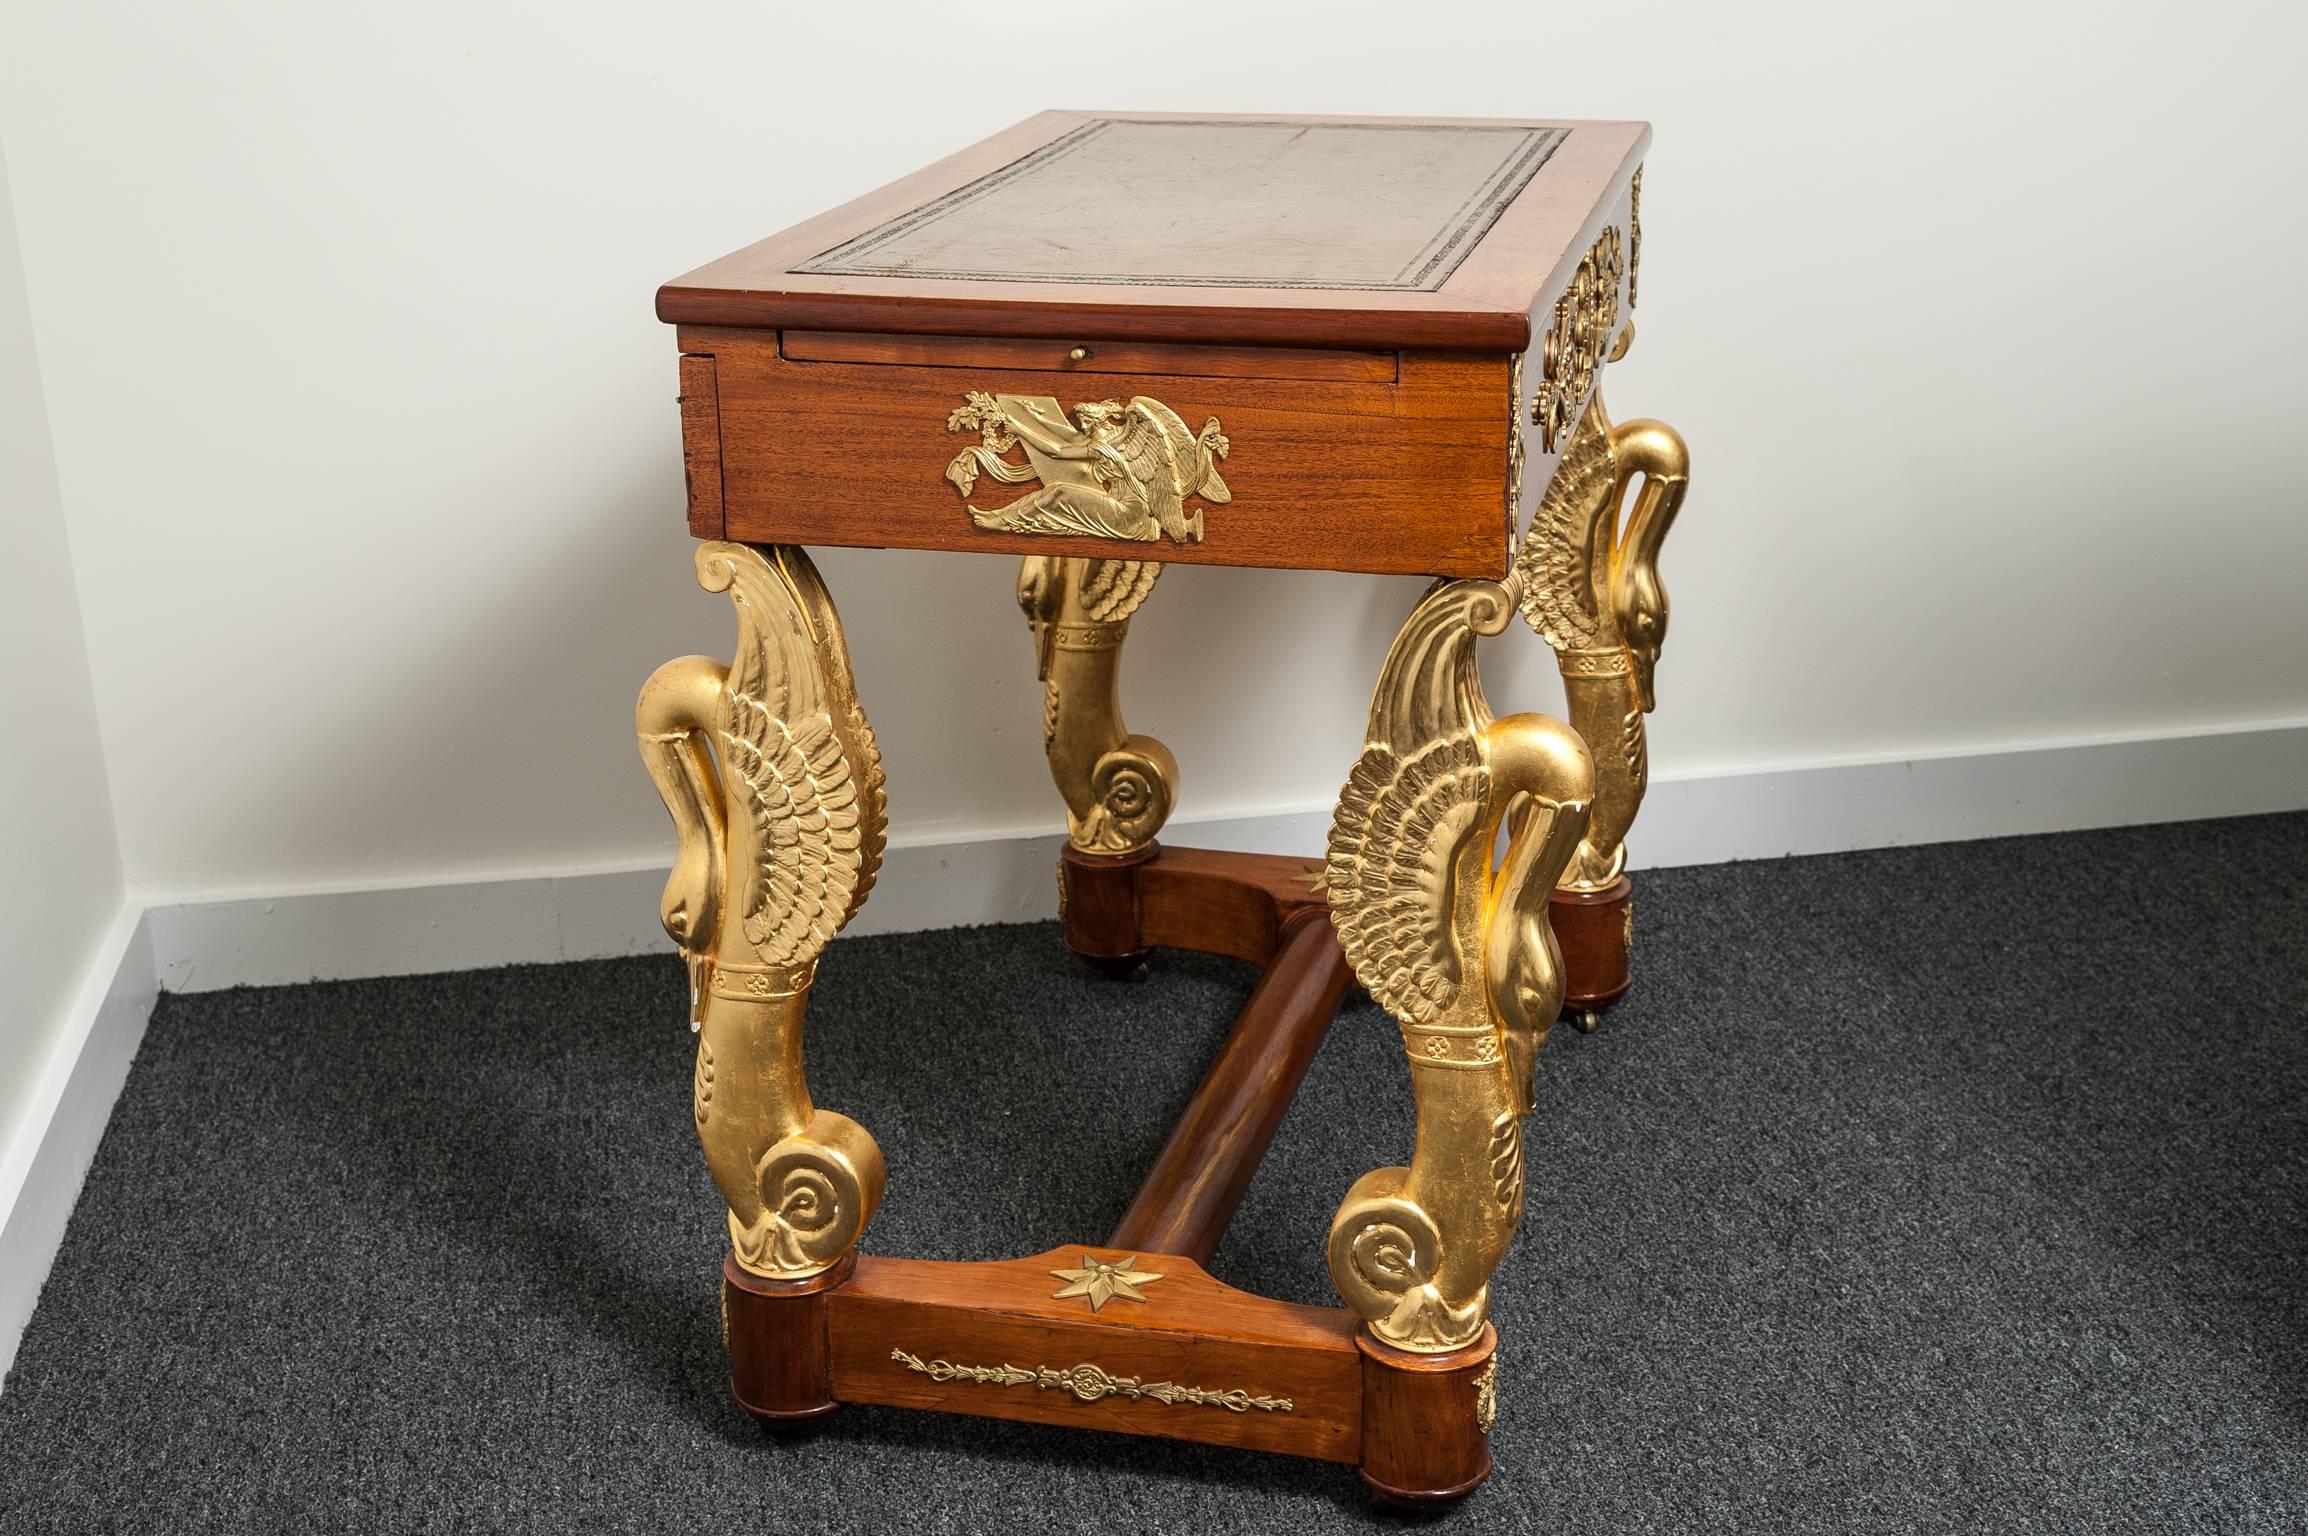 This stylish and chic French Empire piece dates from the napoleioic period of the early 19th century and is fabricated in mahogany with inset leather top, elongated, hand-carved swans with gold-gilt and bronze dore mounts depicting classical scenes